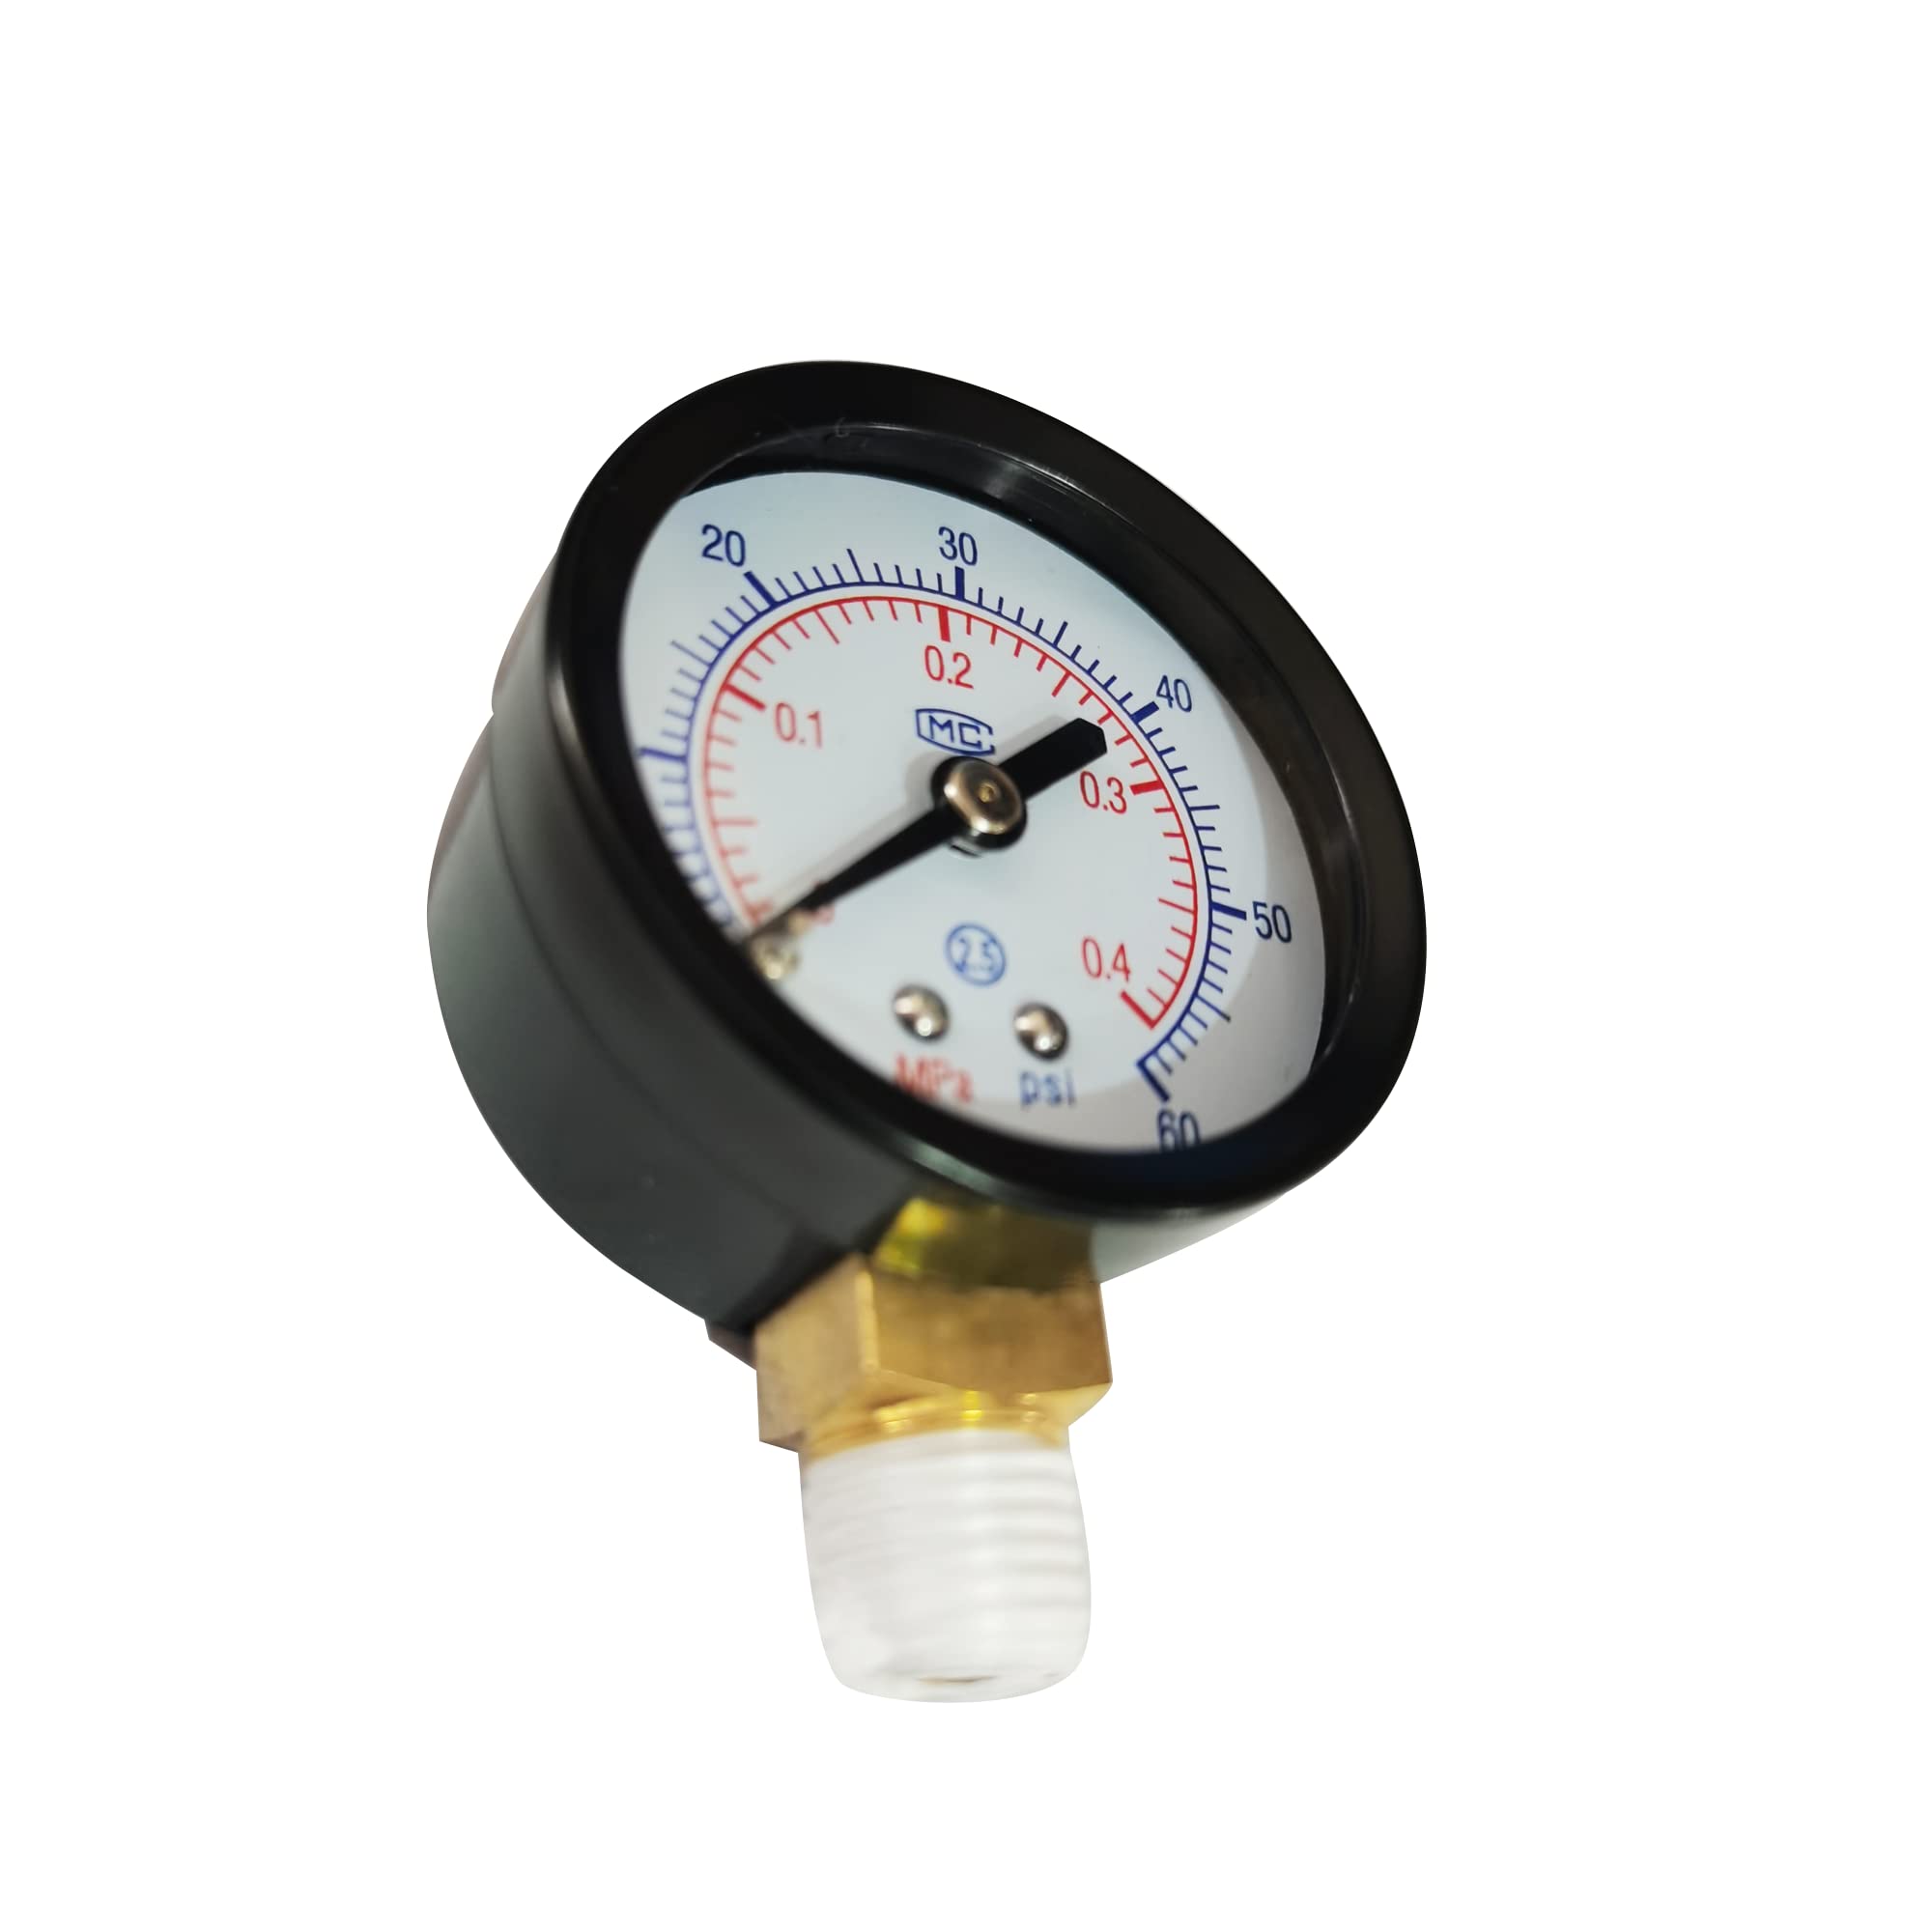 DEF Boxed Pressure Gauge 0-60 PSI Replacement for Select Sand & D.E. Pool Filter ECX270861